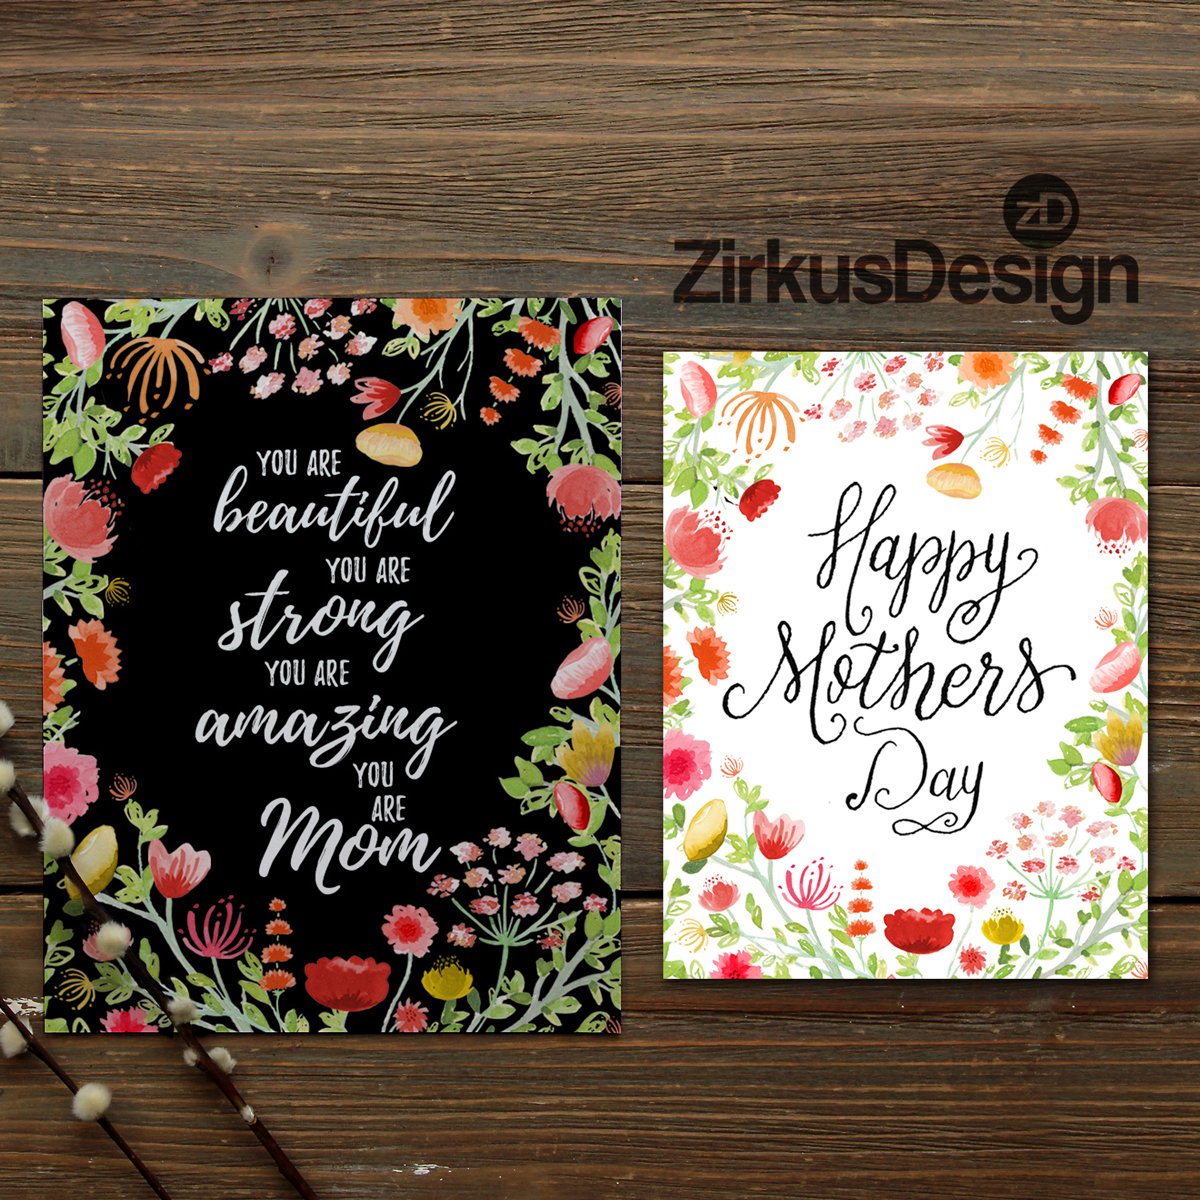 Zirkus Design // Blueprint NYC 2019 Recap + Lessons from a First-Time Attendee // Mother's Day Greeting Cards